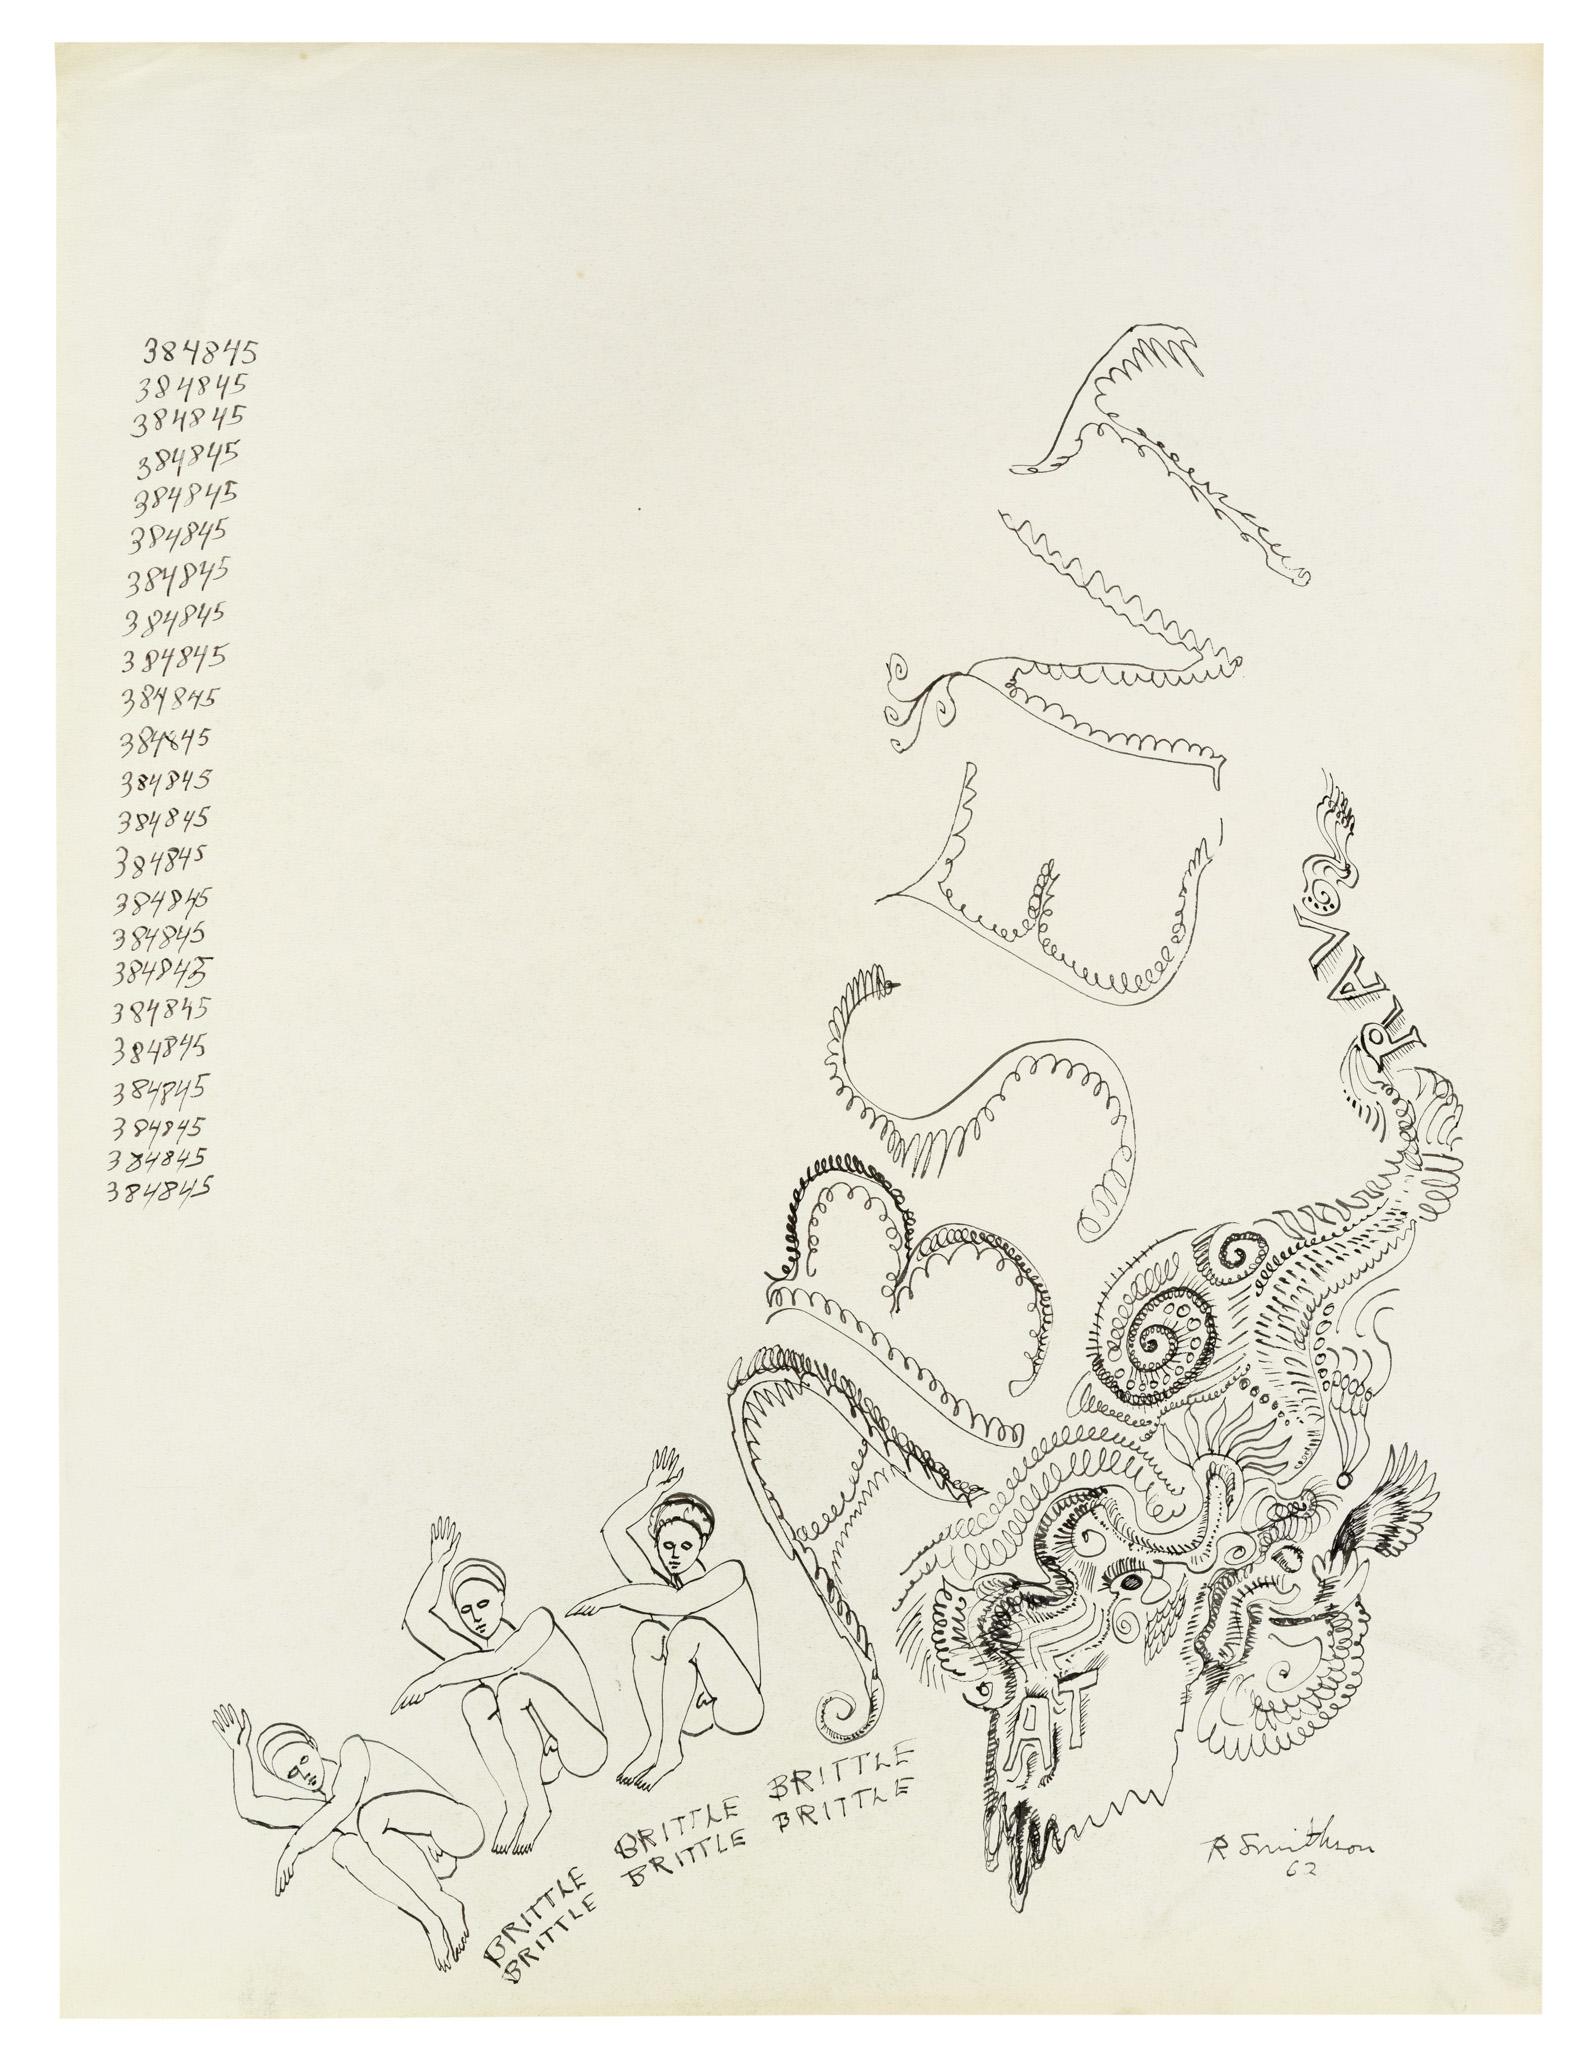 Drawing by Robert Smithson